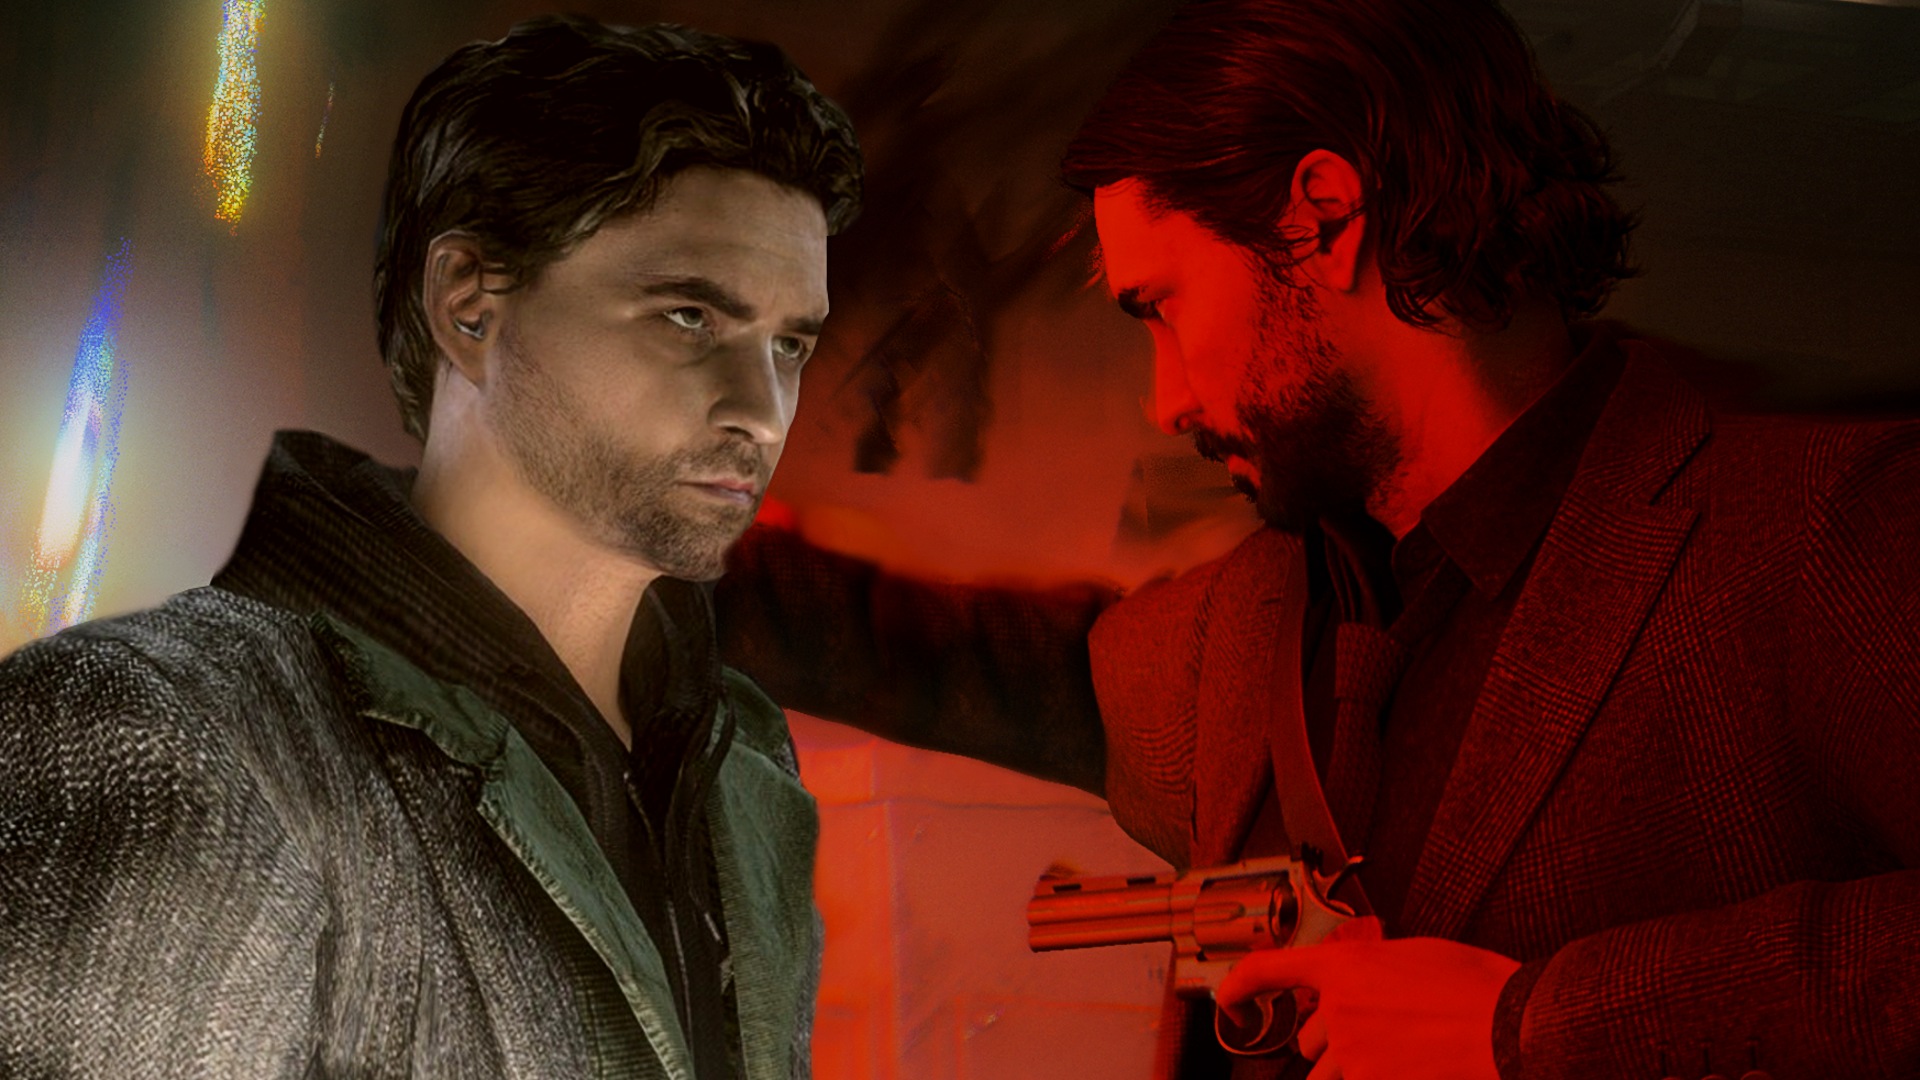 Alan Wake 2: What to know if you haven't played the original game